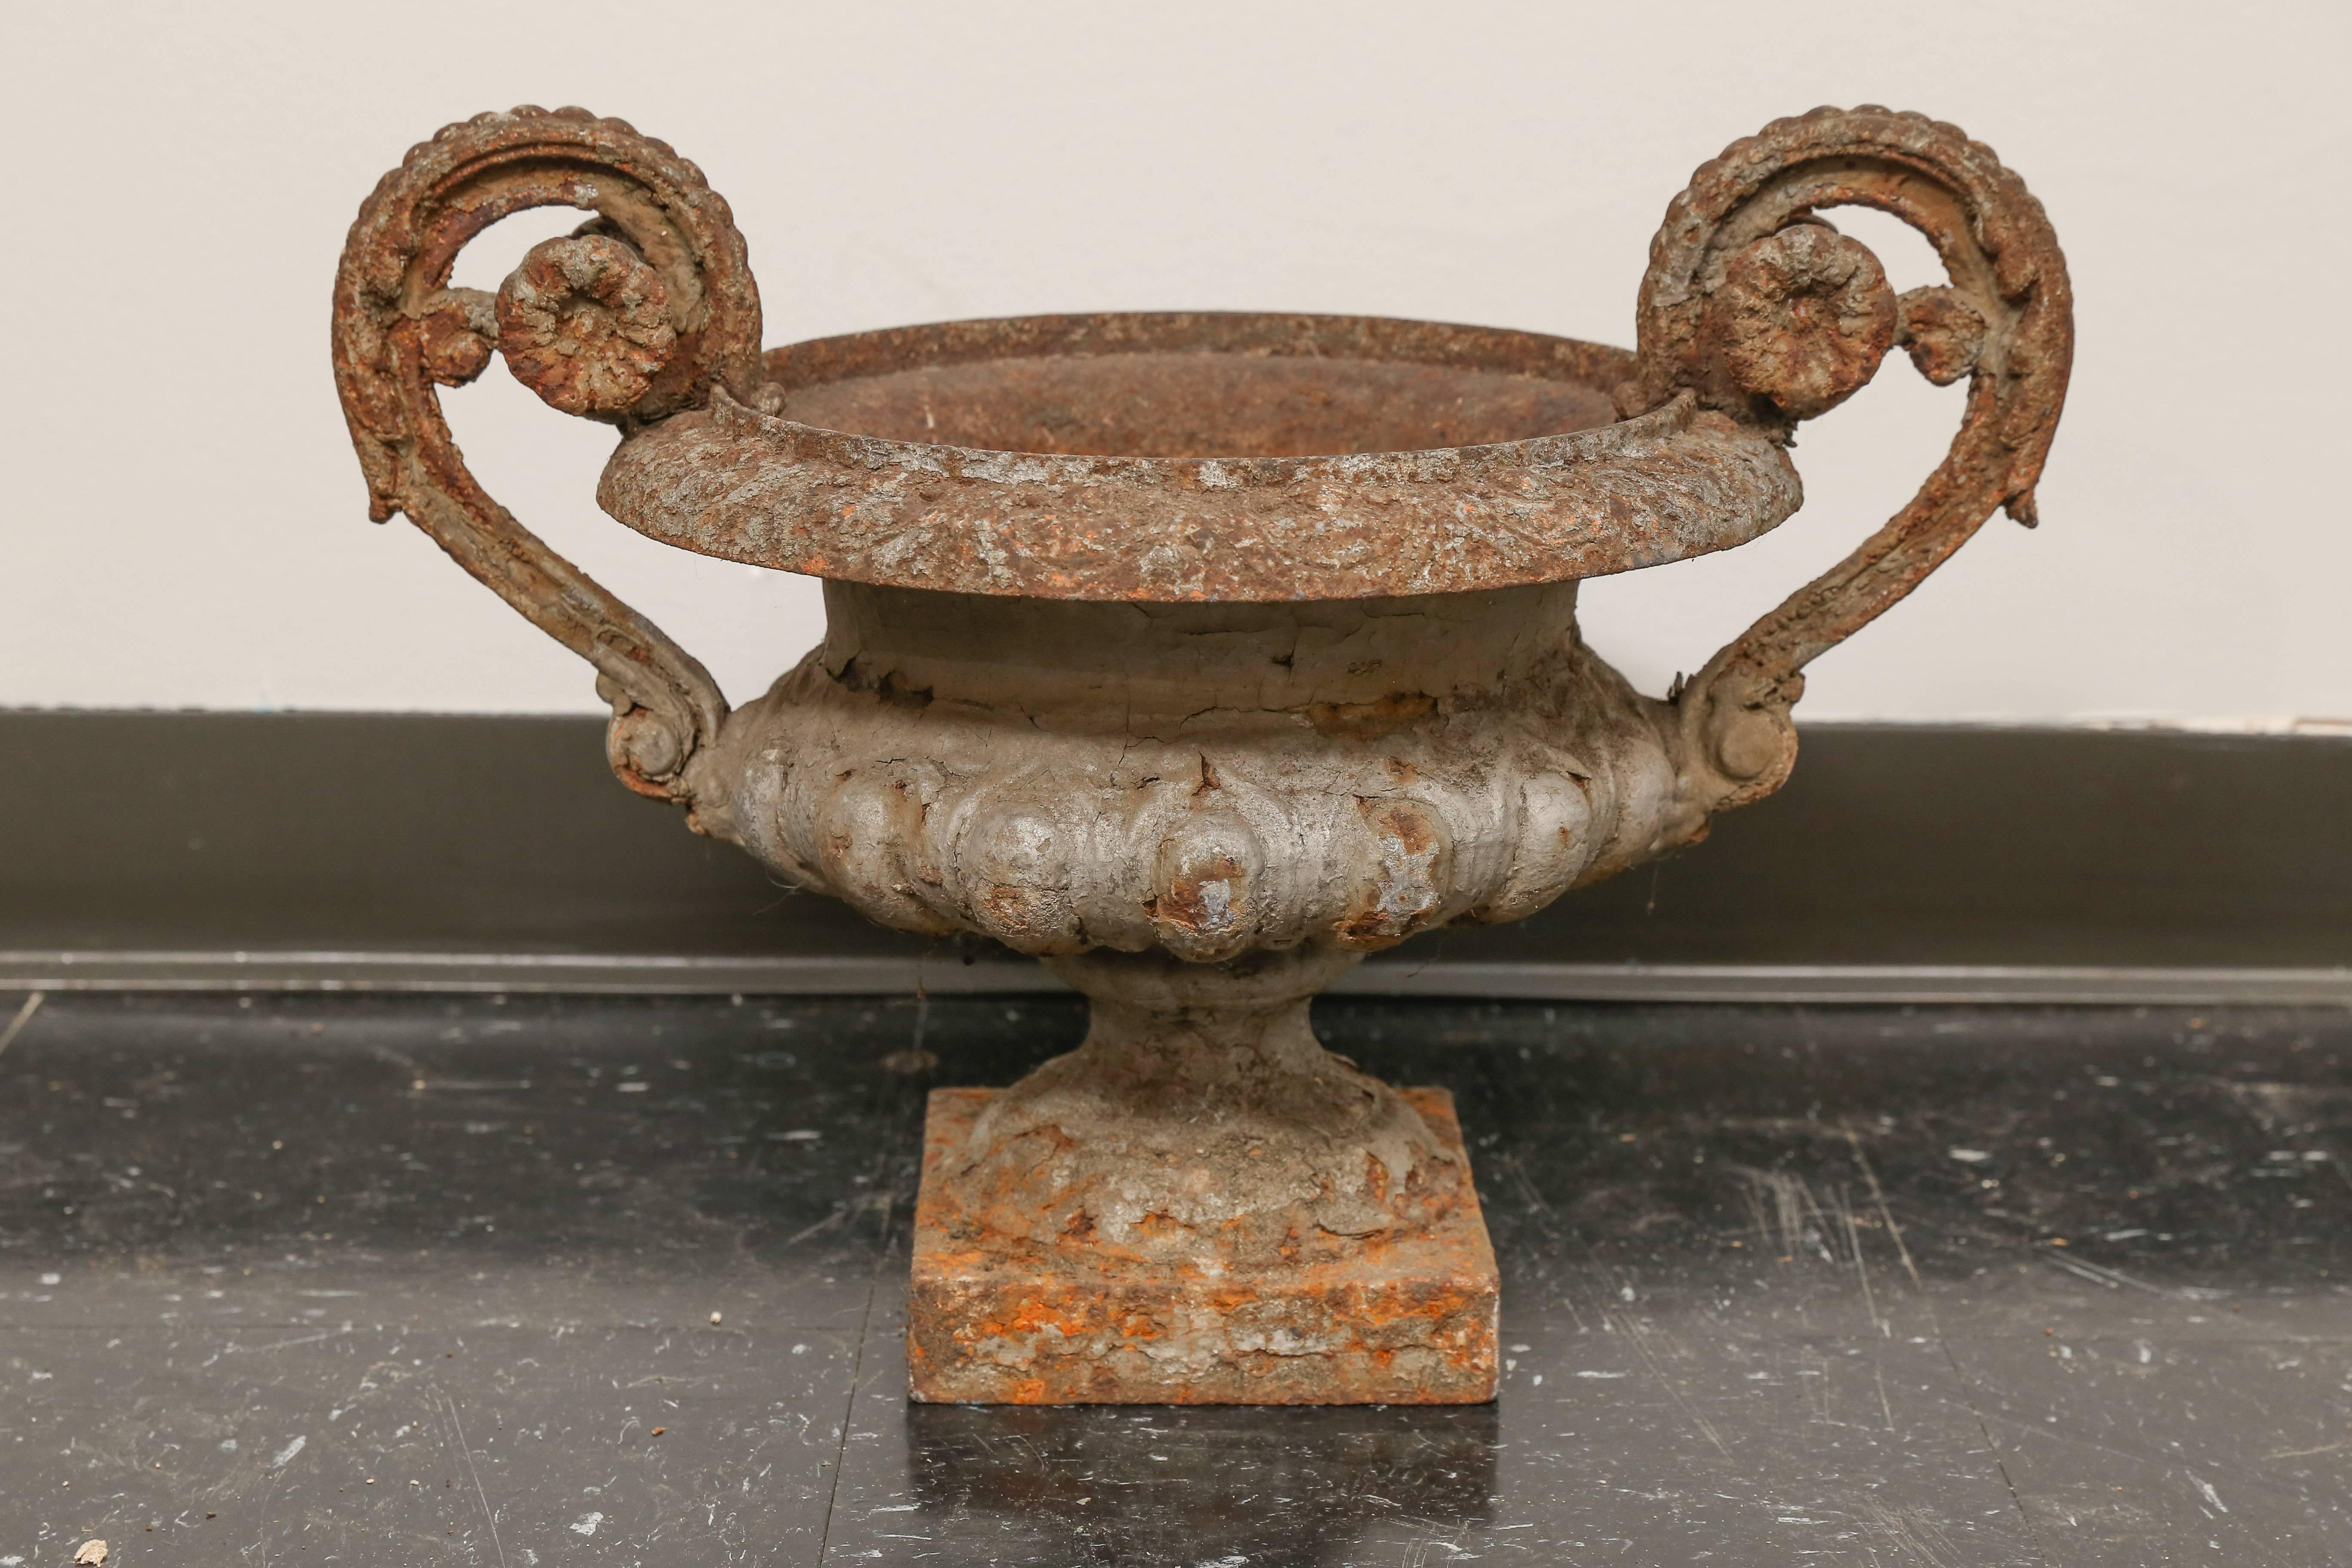 19th Century French iron garden urn with curled handles and flower motif. Interior circumference is 8 inches. Square base is 6.5 inches by 6.5 inches.